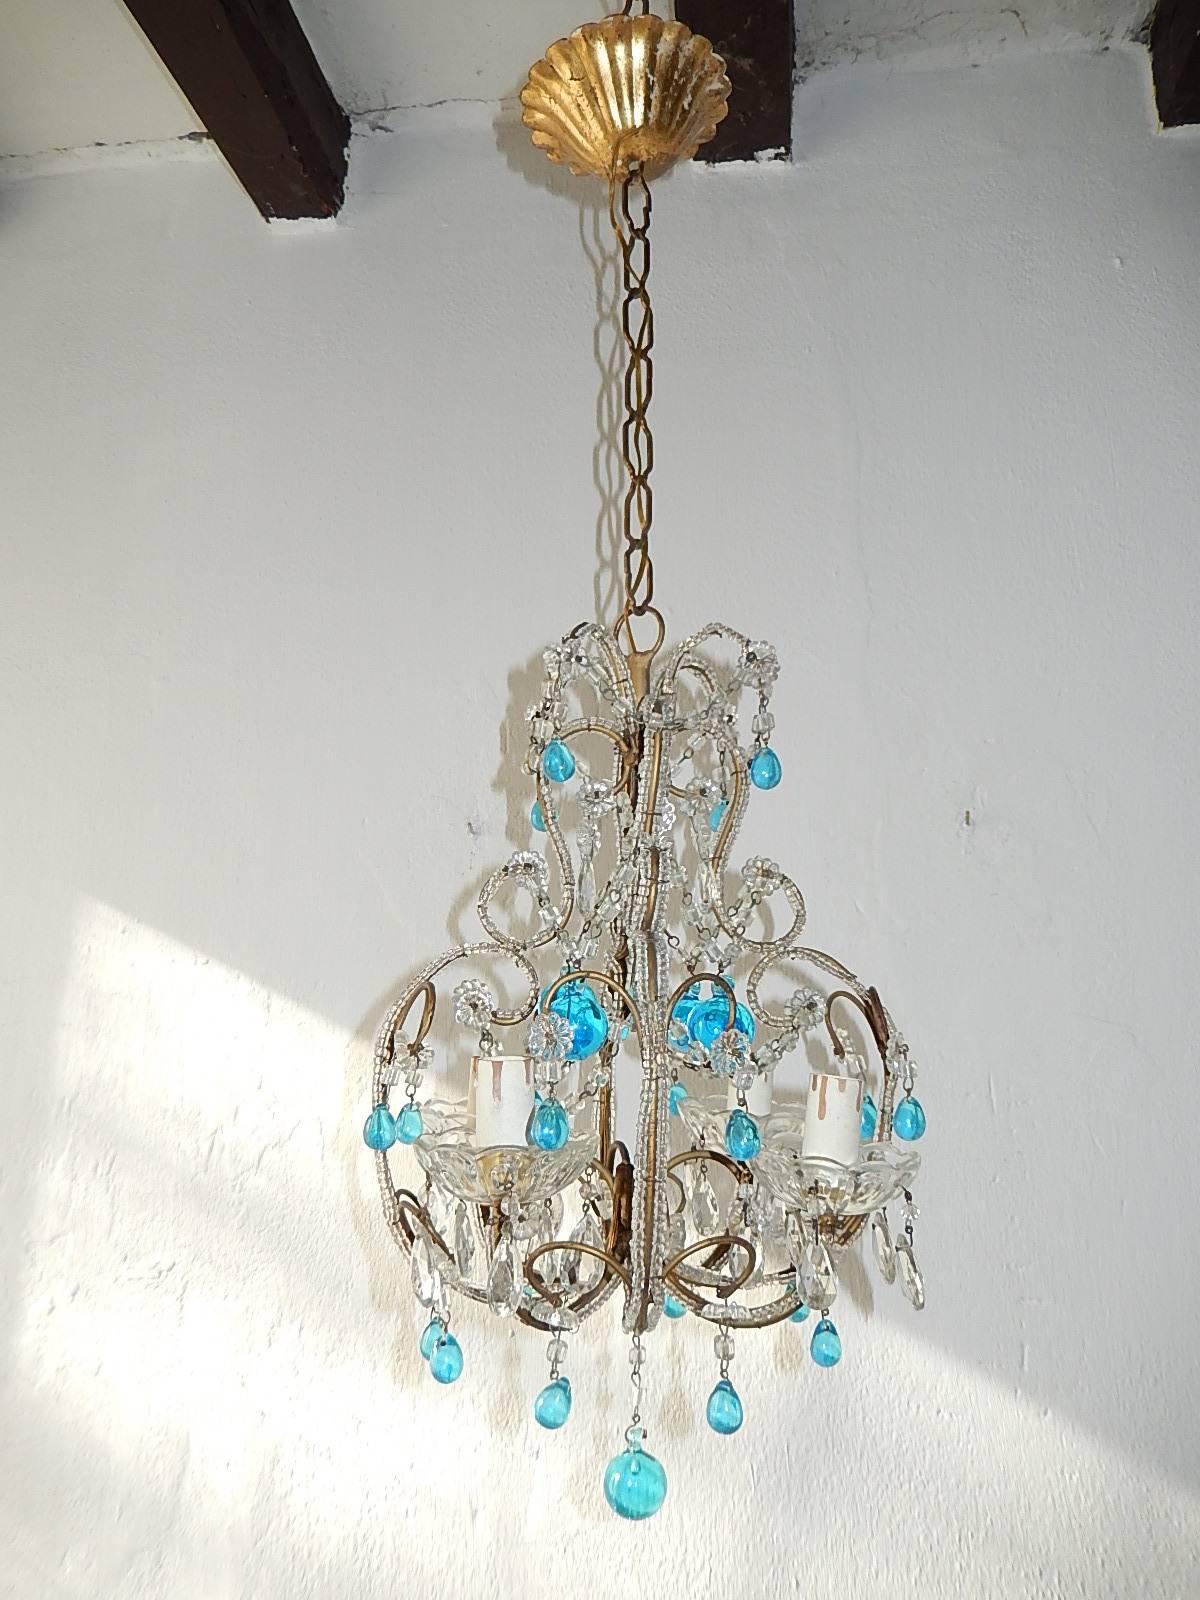 Housing four lights sitting in crystal bobeches, dripping with vintage crystals. Rewired and ready to hang. Double beaded frame with swags of macaroni beads. Adorning both small and large blue Murano drops. Adding another 12 inches of original chain